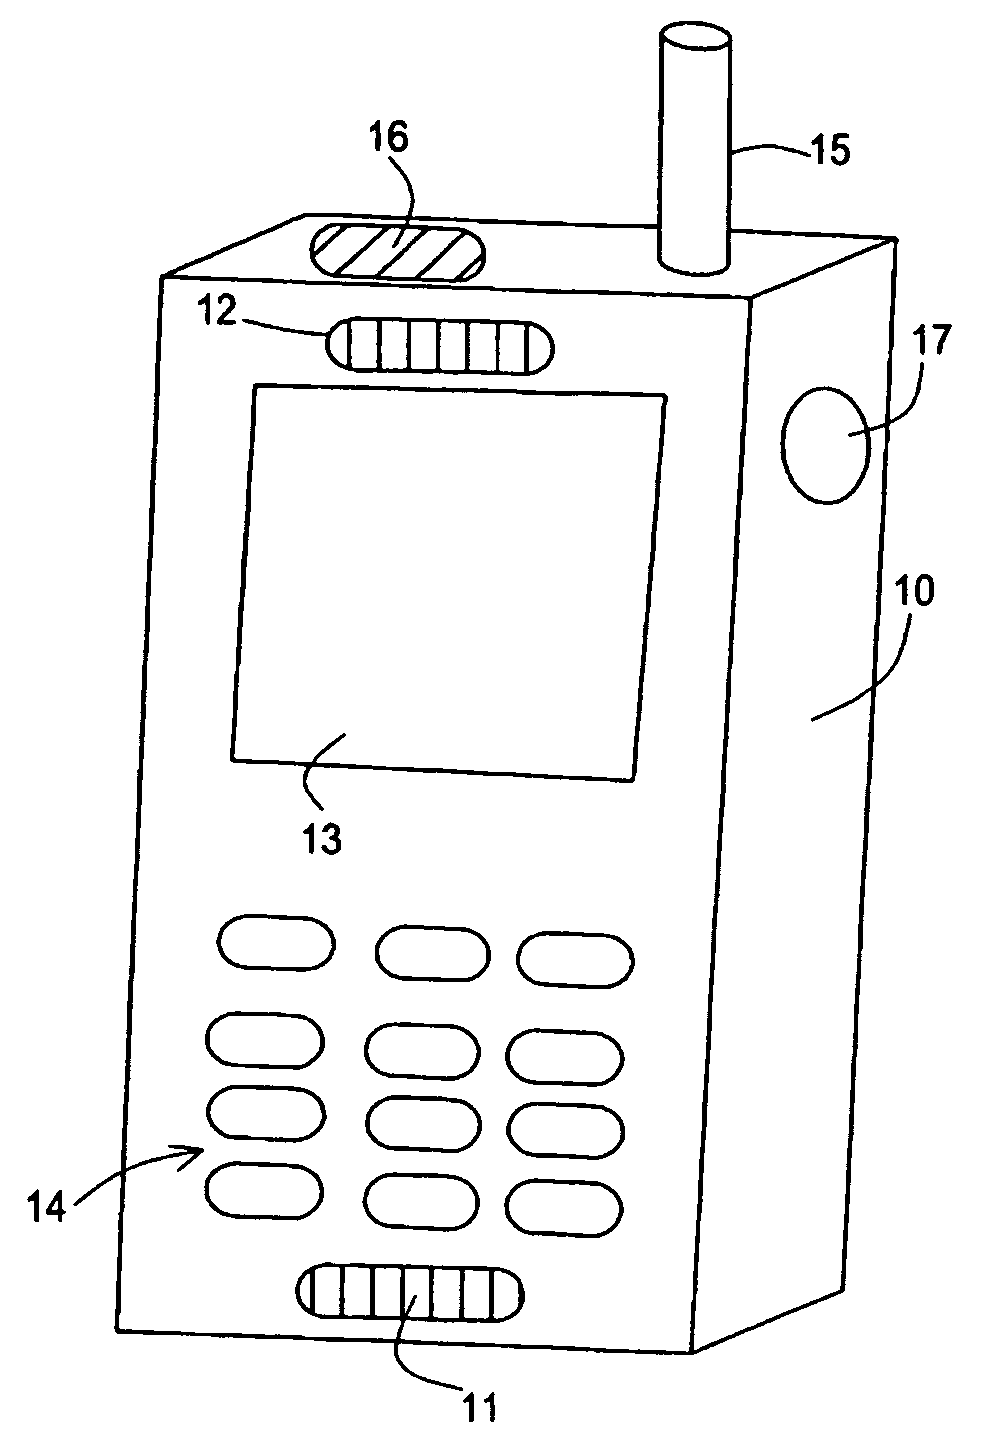 Environmental noise reduction and cancellation for a cellular telephone communication device